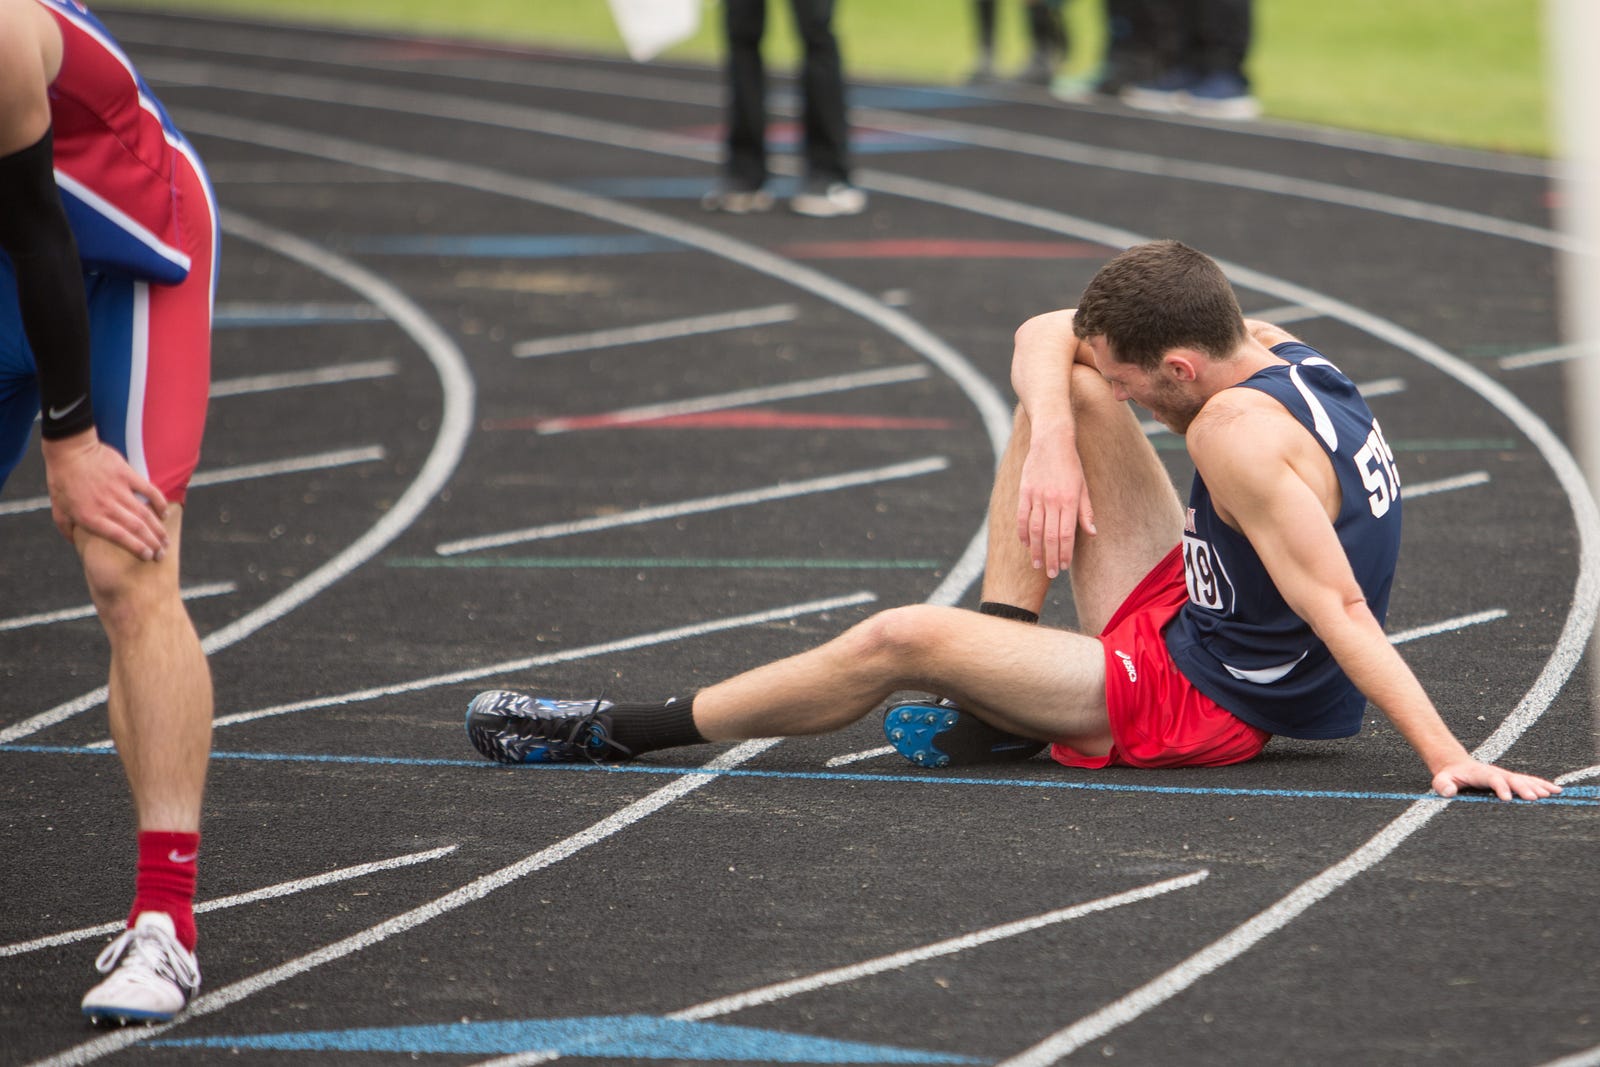 A runner collapses on the track after the end of a race. How difficult does your workout seem to you? Are you utterly exhausted, or did the activity seem easy? The RPE (Rate of Perceived Exertion) scale measures exercise intensity. The RPE scale runs from 0–10.